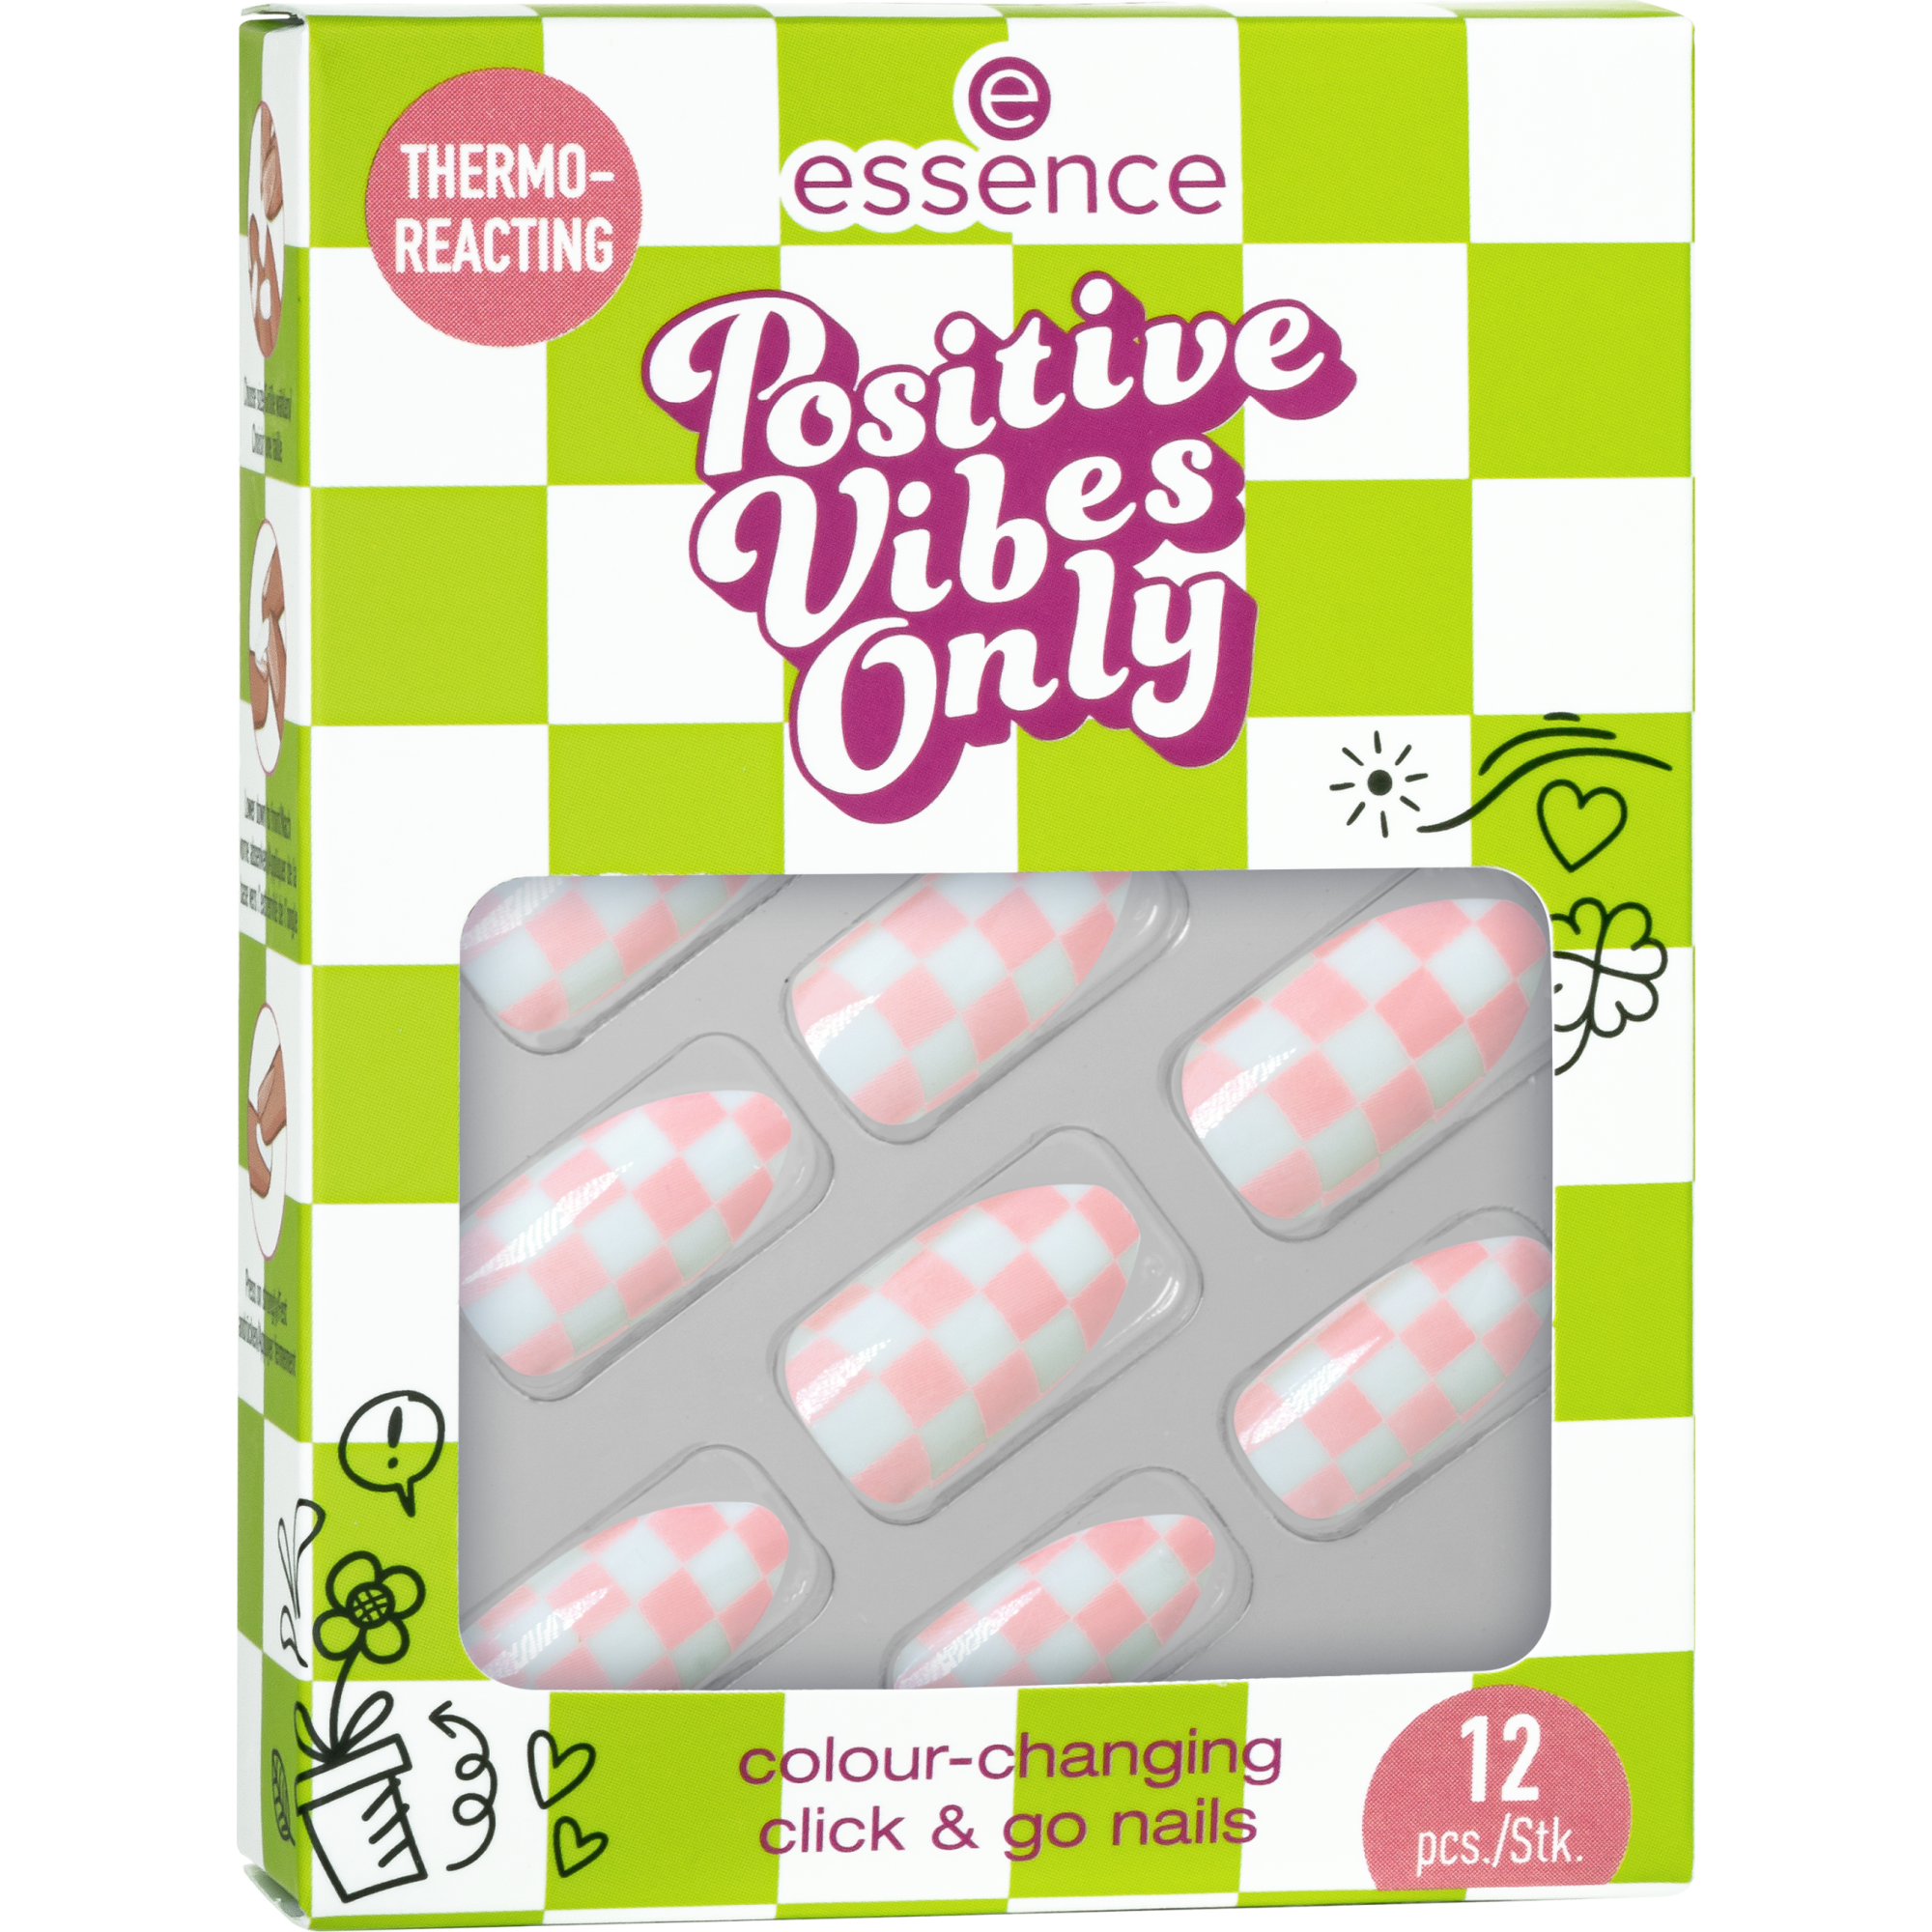 Positive Vibes Only colour-changing click & go nails